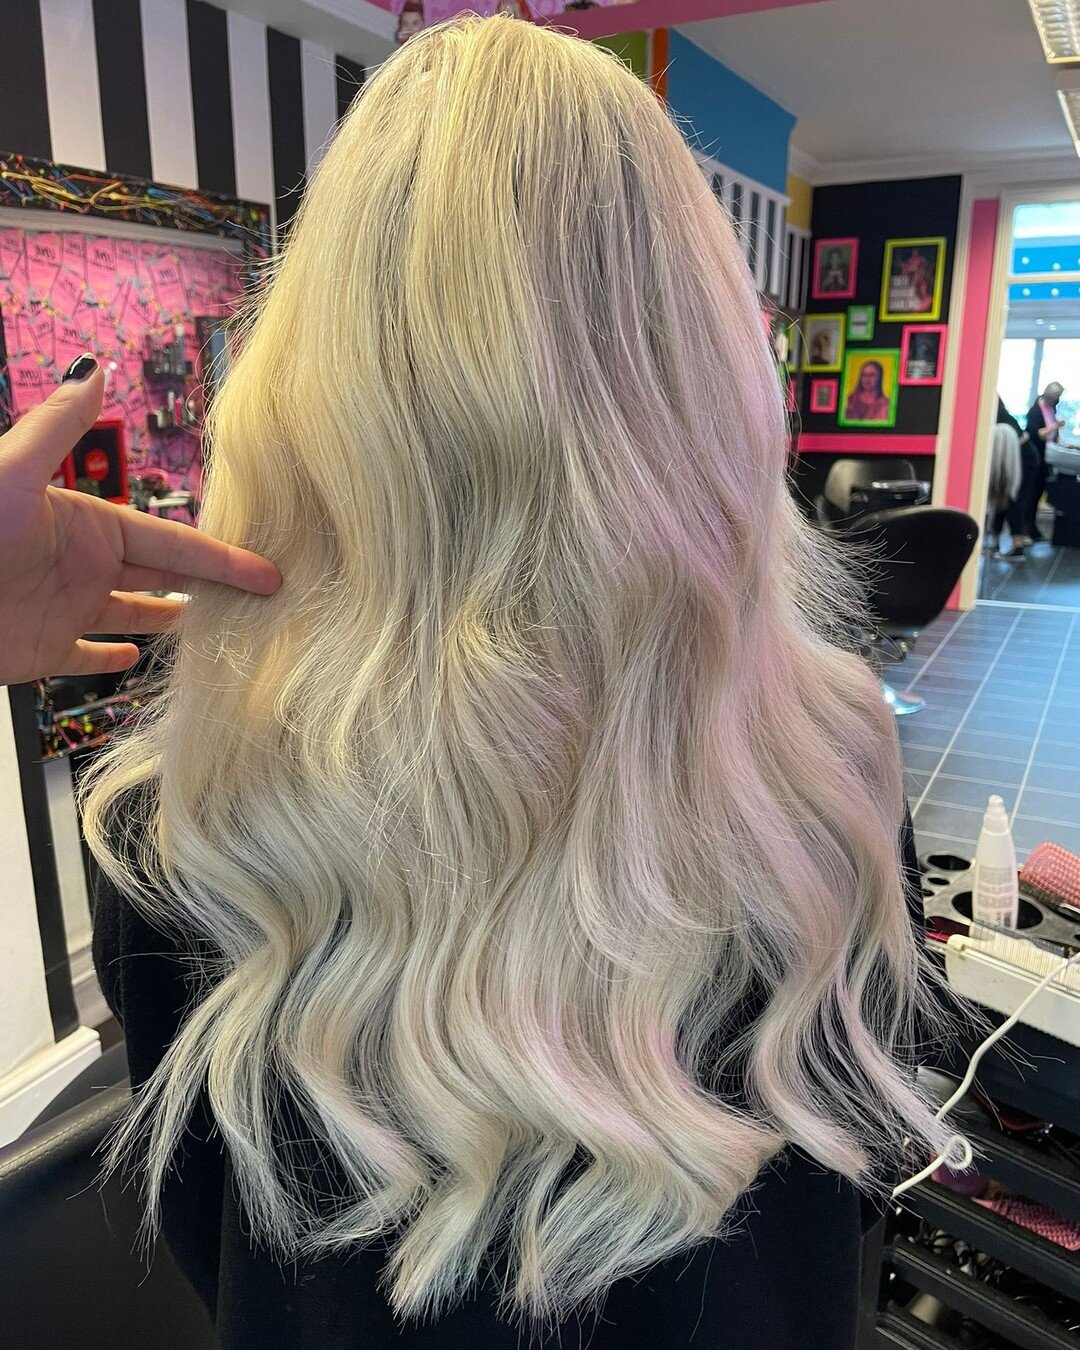 FAB-U-LOUS 💛🤩

This queen had a refit of 100g @beautyworksprofessional nanos in Pure Platinum.

4 month old hair looking brand new! Just shows how important it is to take care of your hair girlies 👏💛

@edenrosesalon_ #edenroseextensions #edenrose